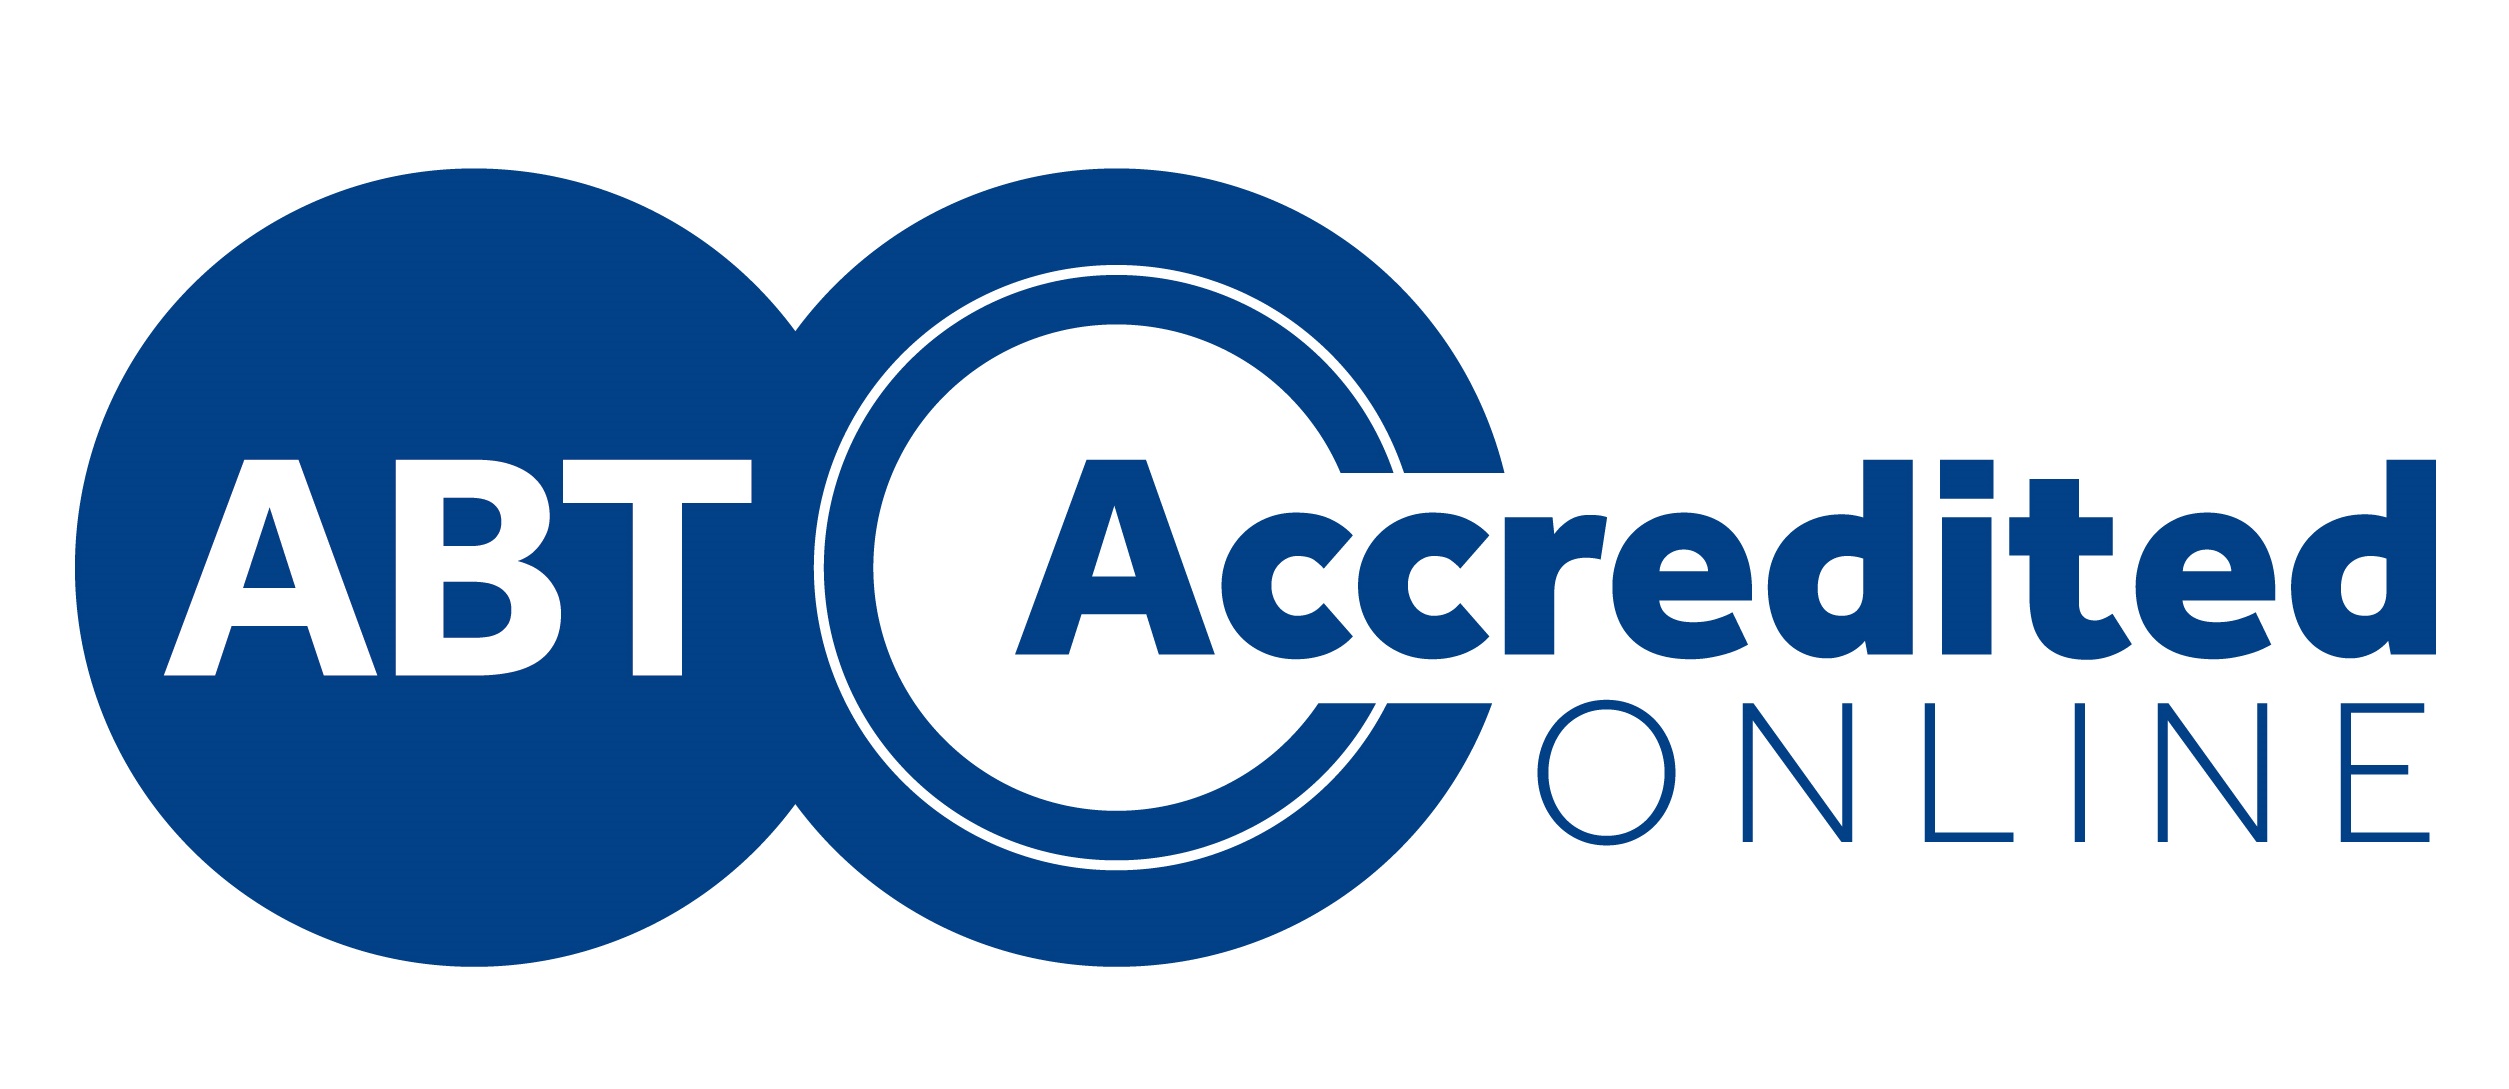 ABT Online Accredited Logo